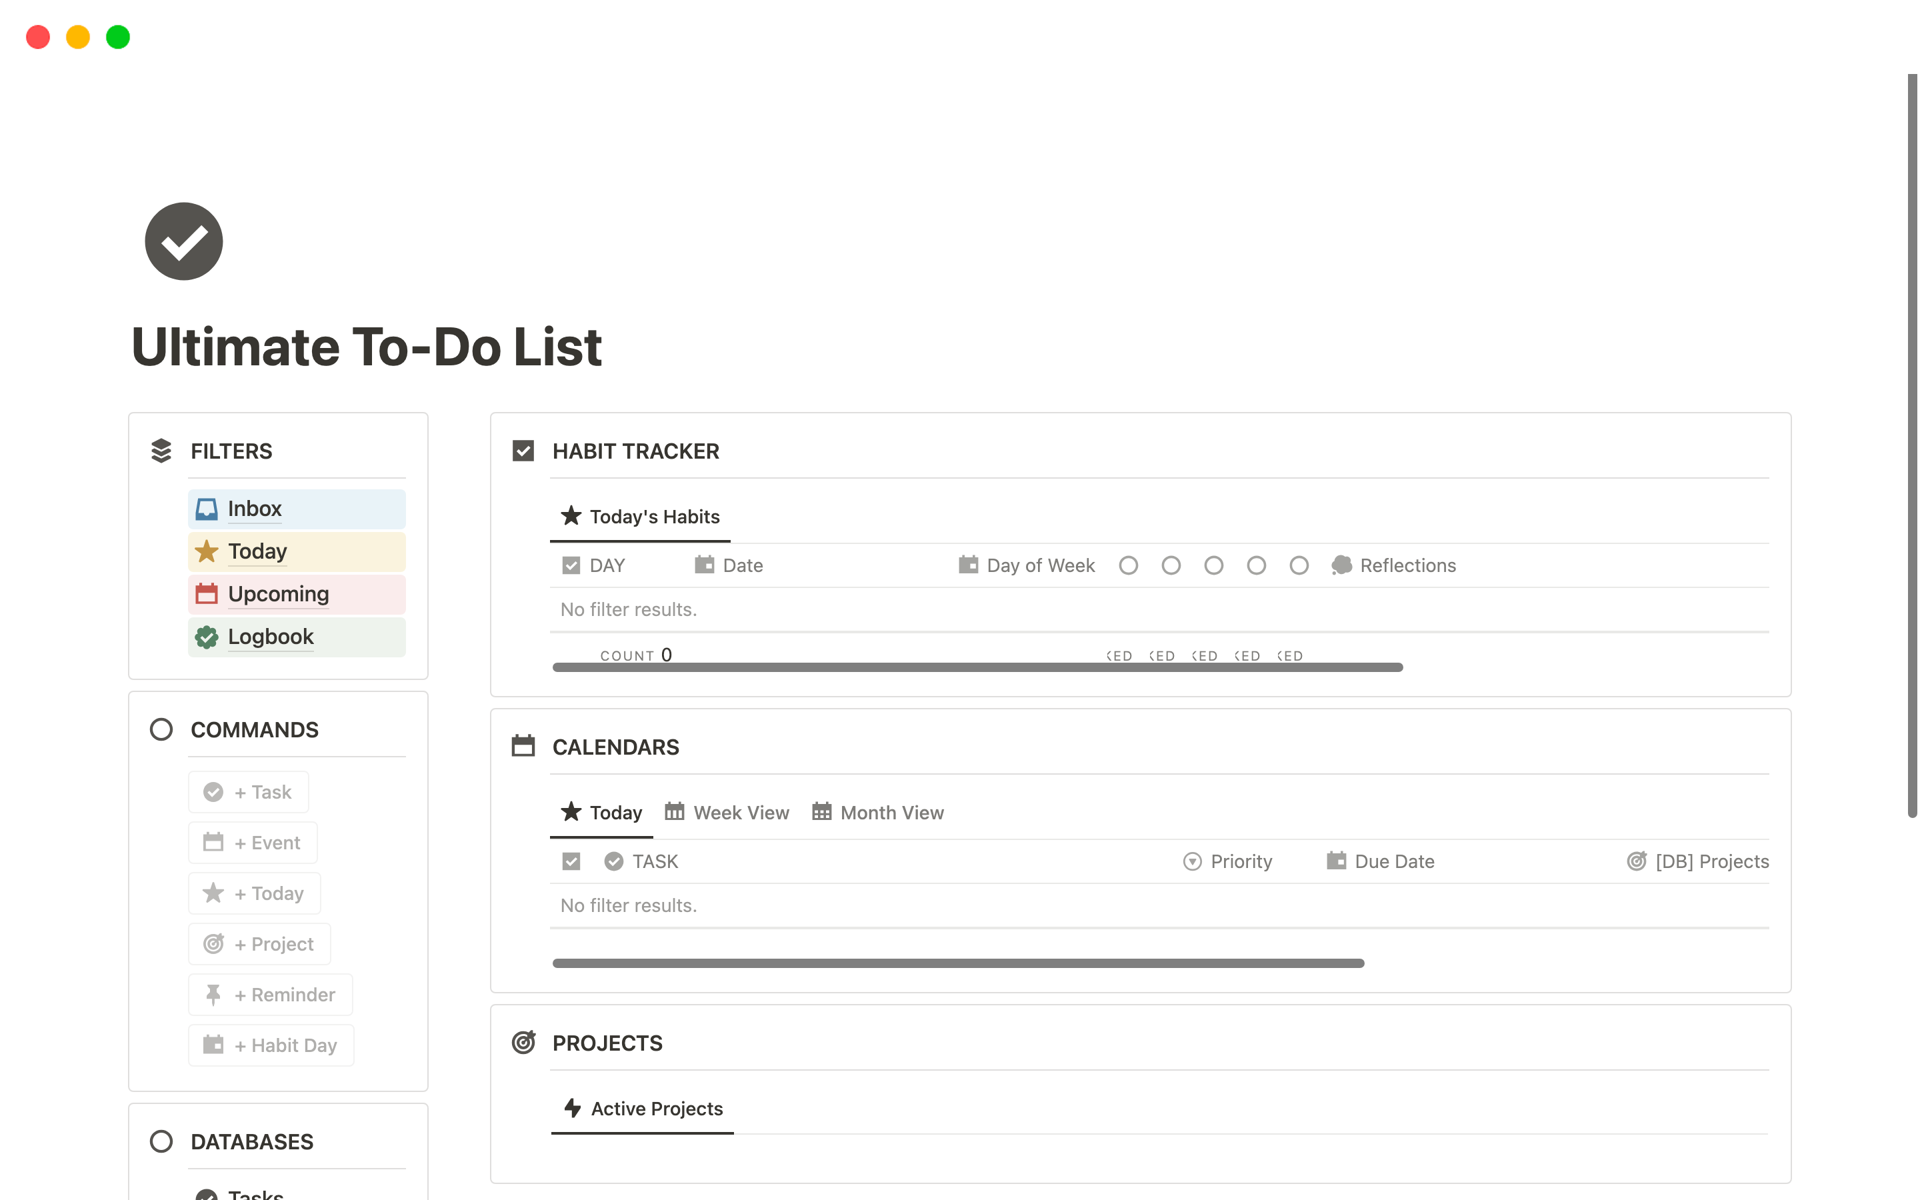 An easy-to-use & intuitive template to optimize your day-to-day workflow through a comprehensive task management system.